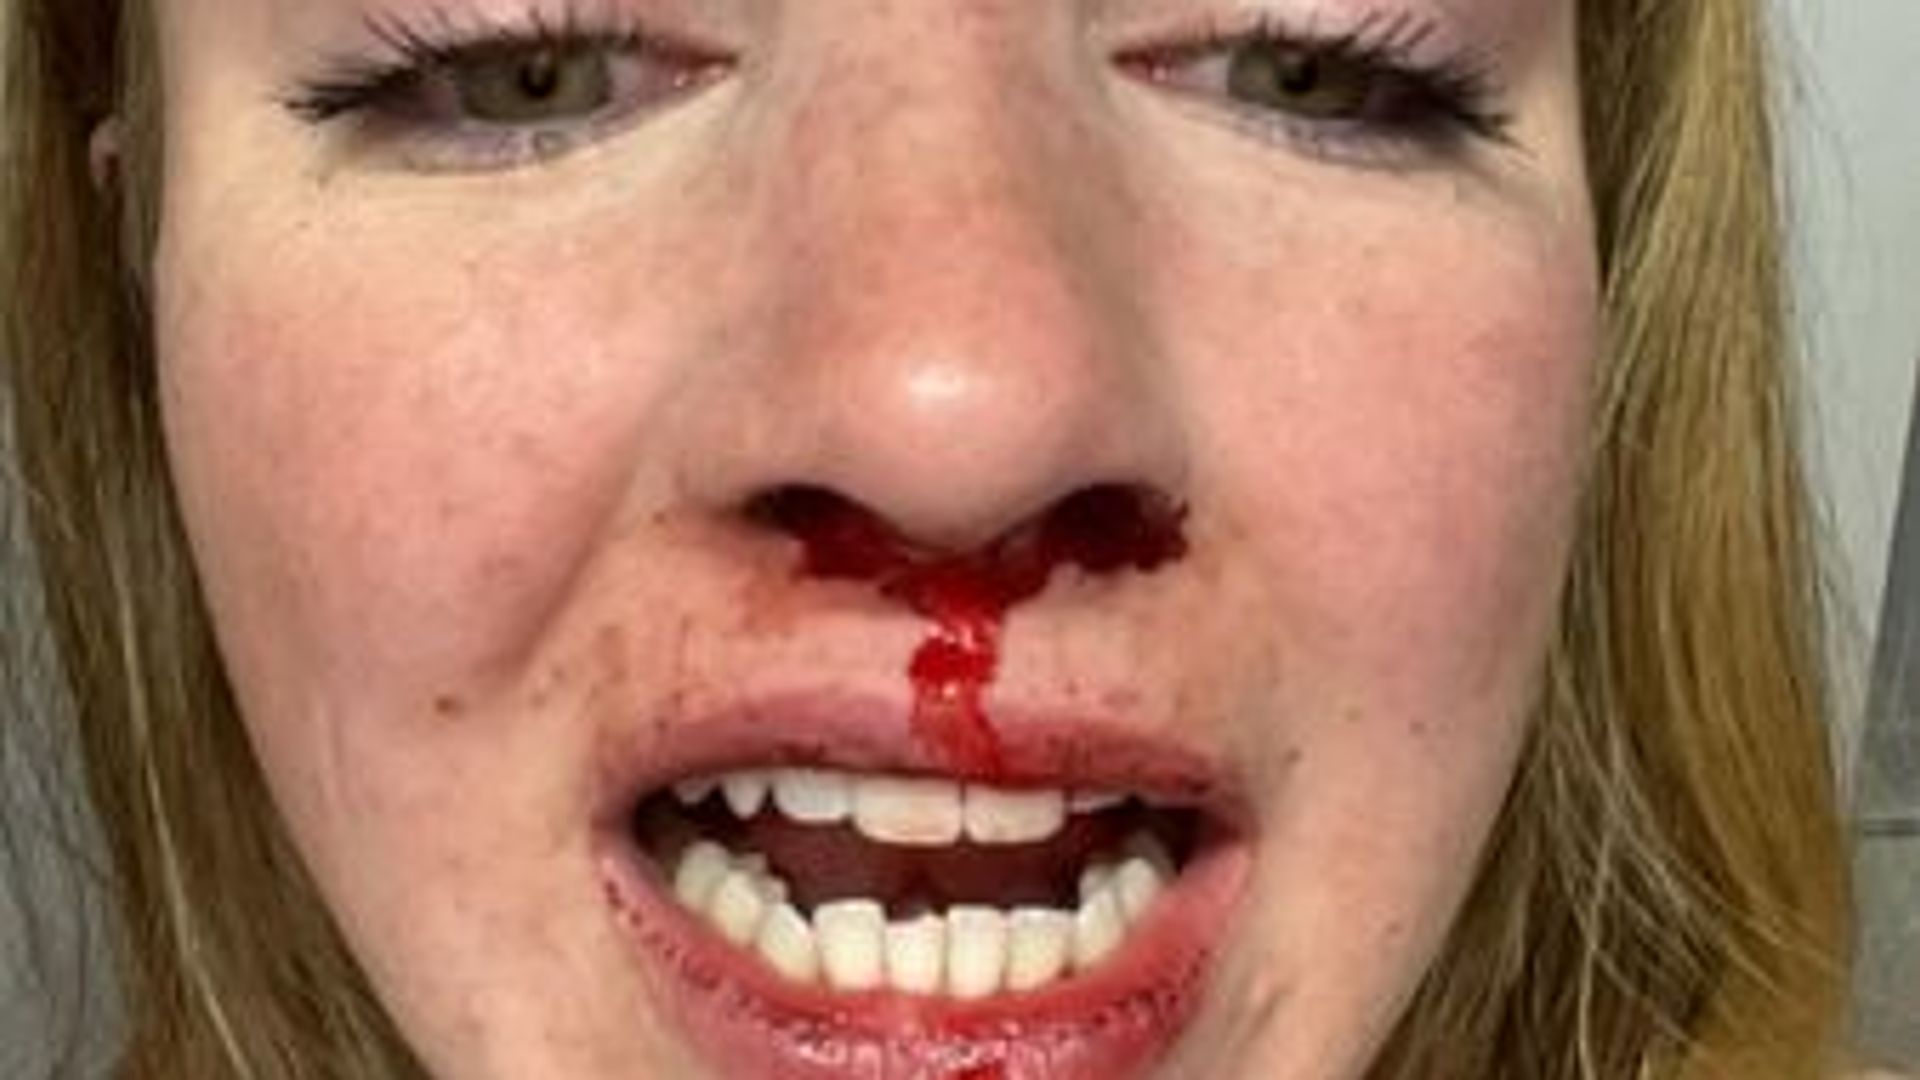 Woman 'terrified' to return to area after 'homophobic' attack by group of men